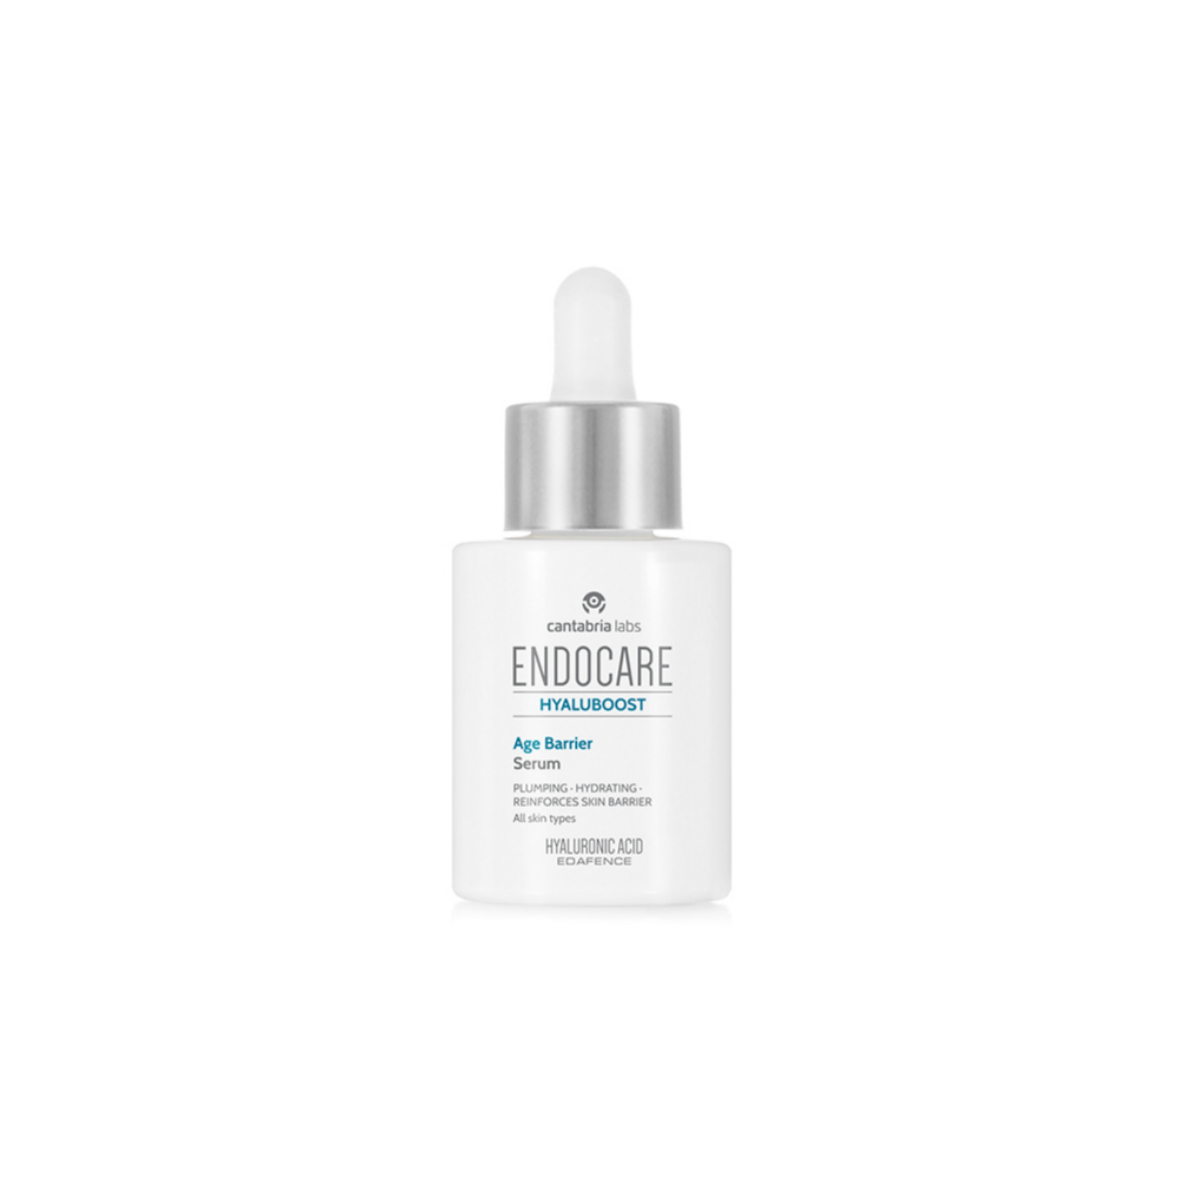 Age Barrier. Serum Hyaluboost, de Endocare <strong>Cantabria Labs</strong> (62,11 euros).